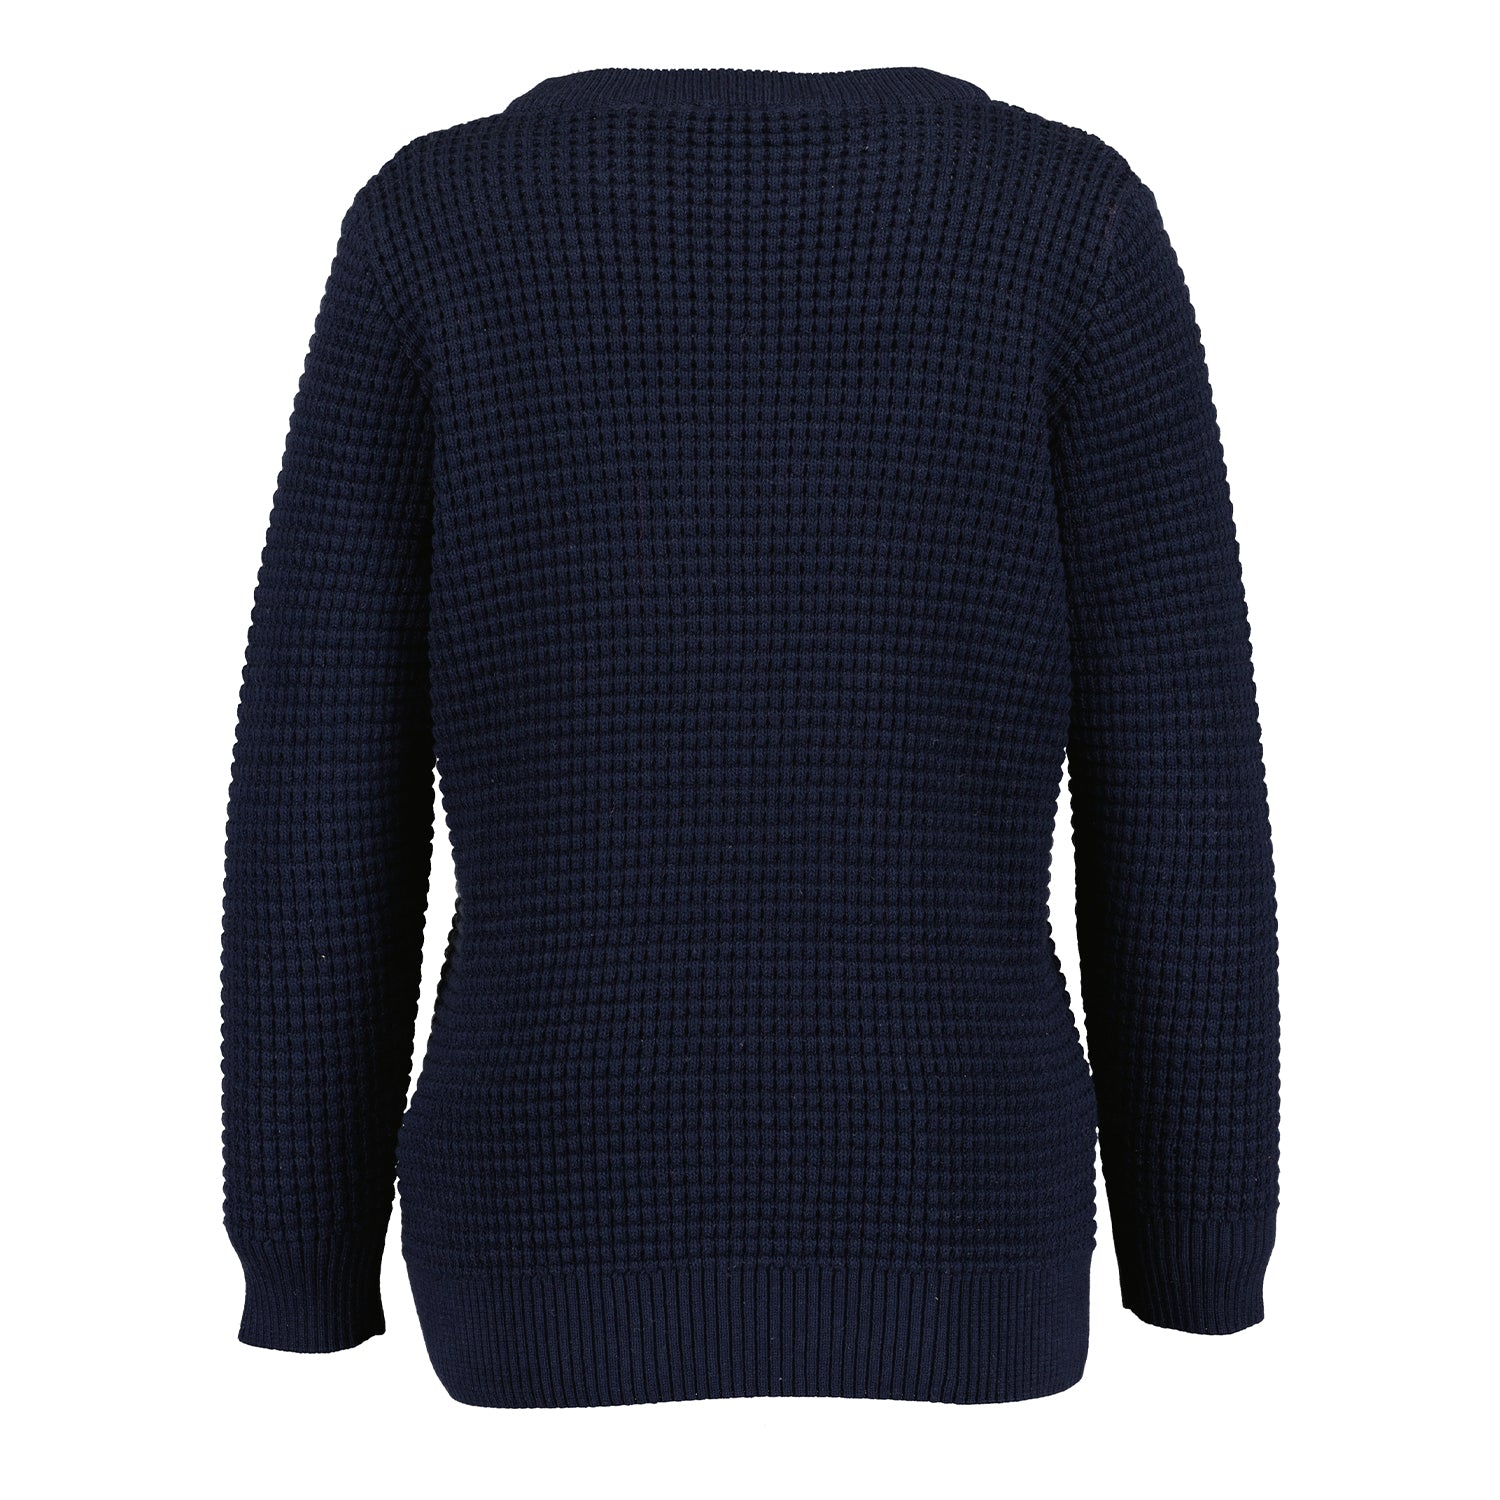 Navy Patterned Pullover